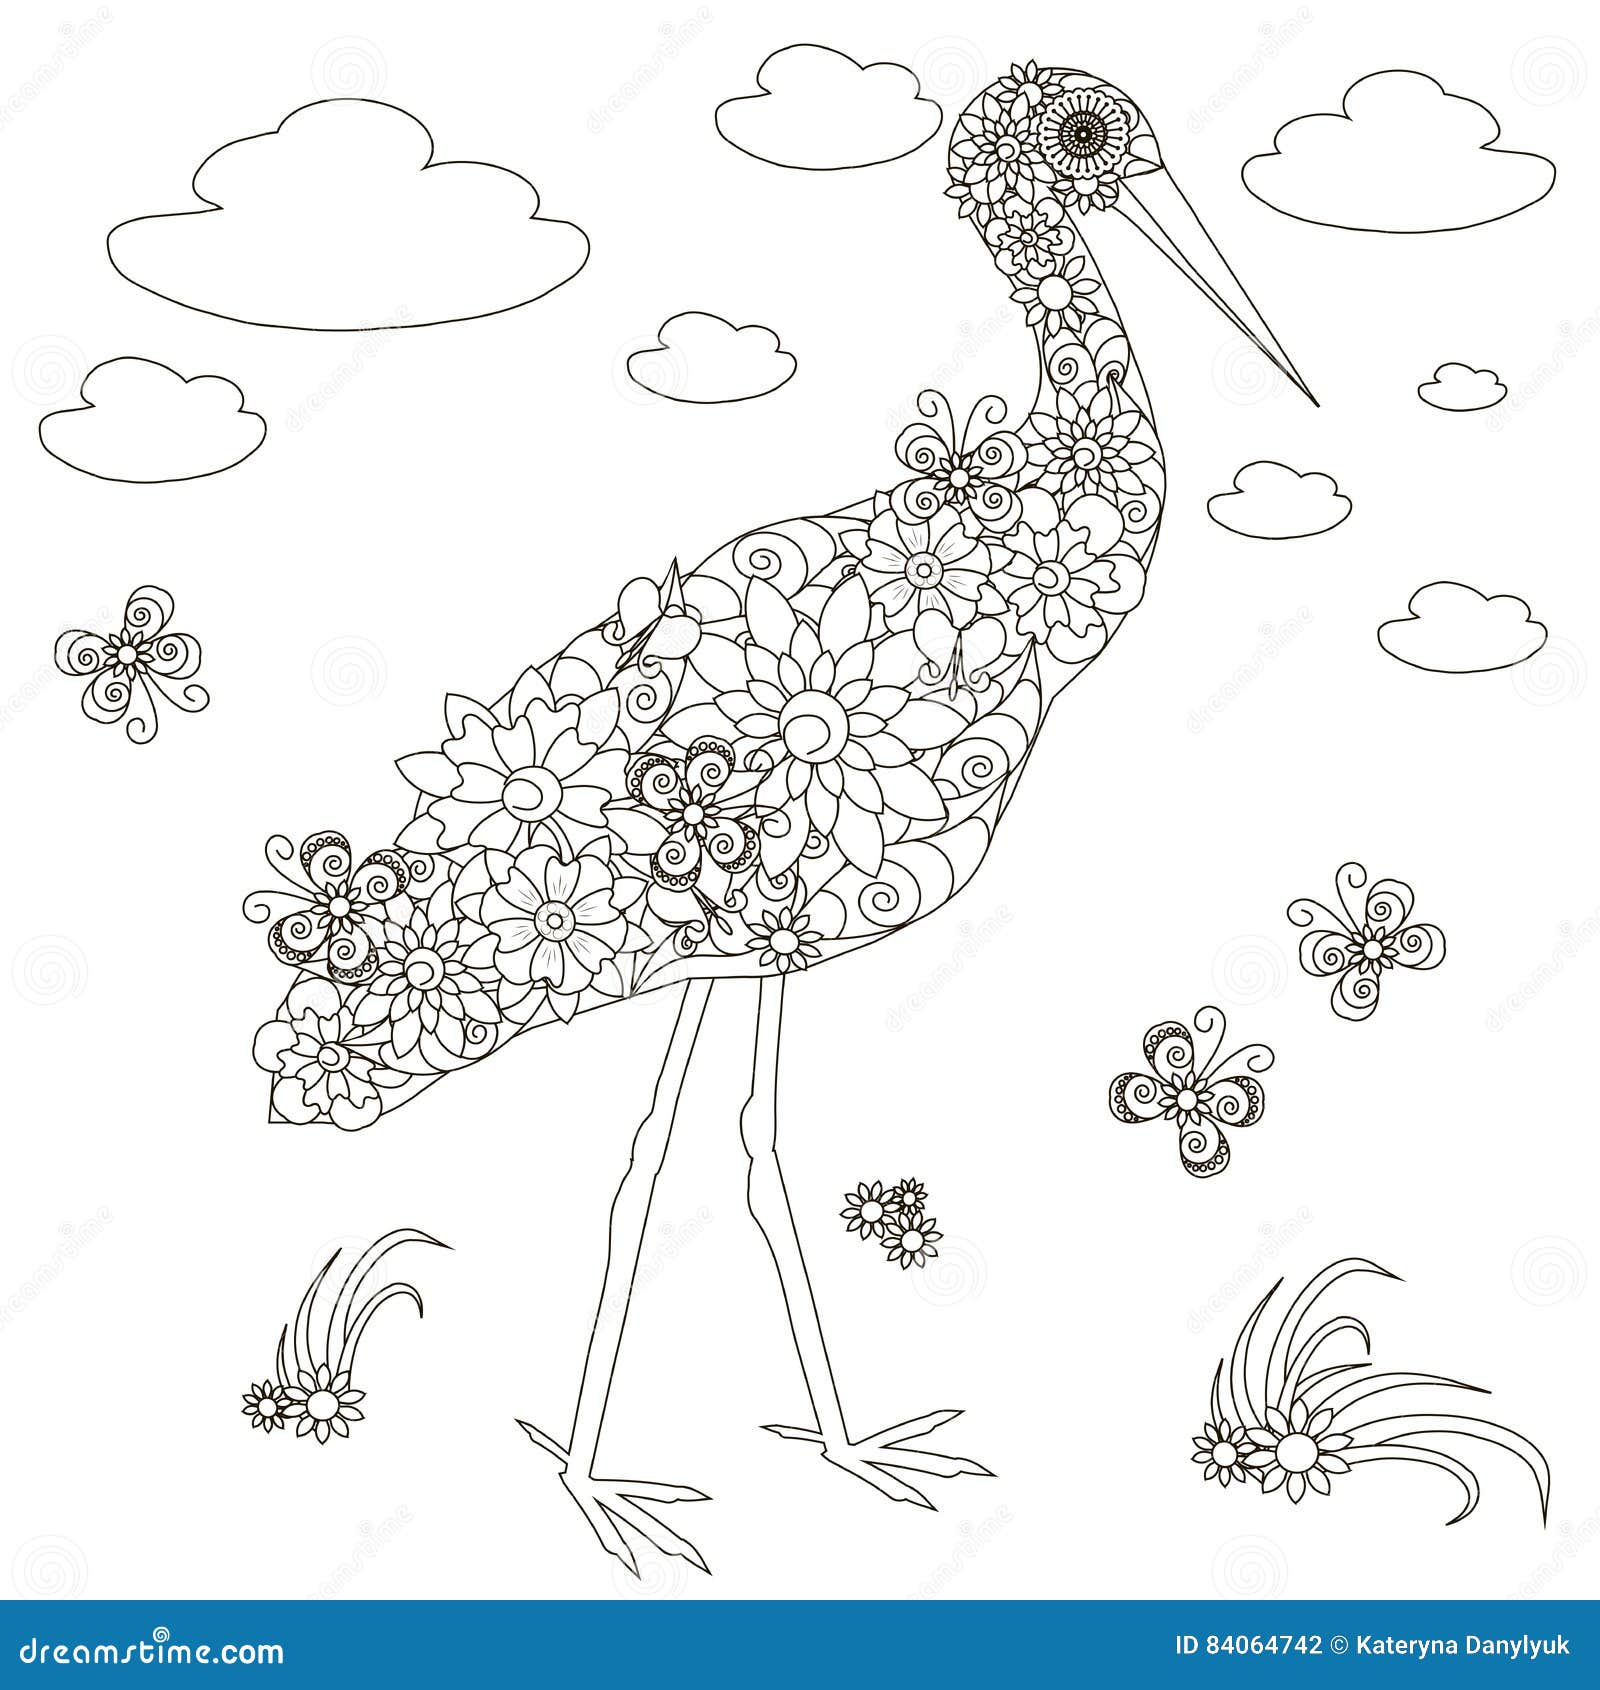 Flowers stork coloring page anti